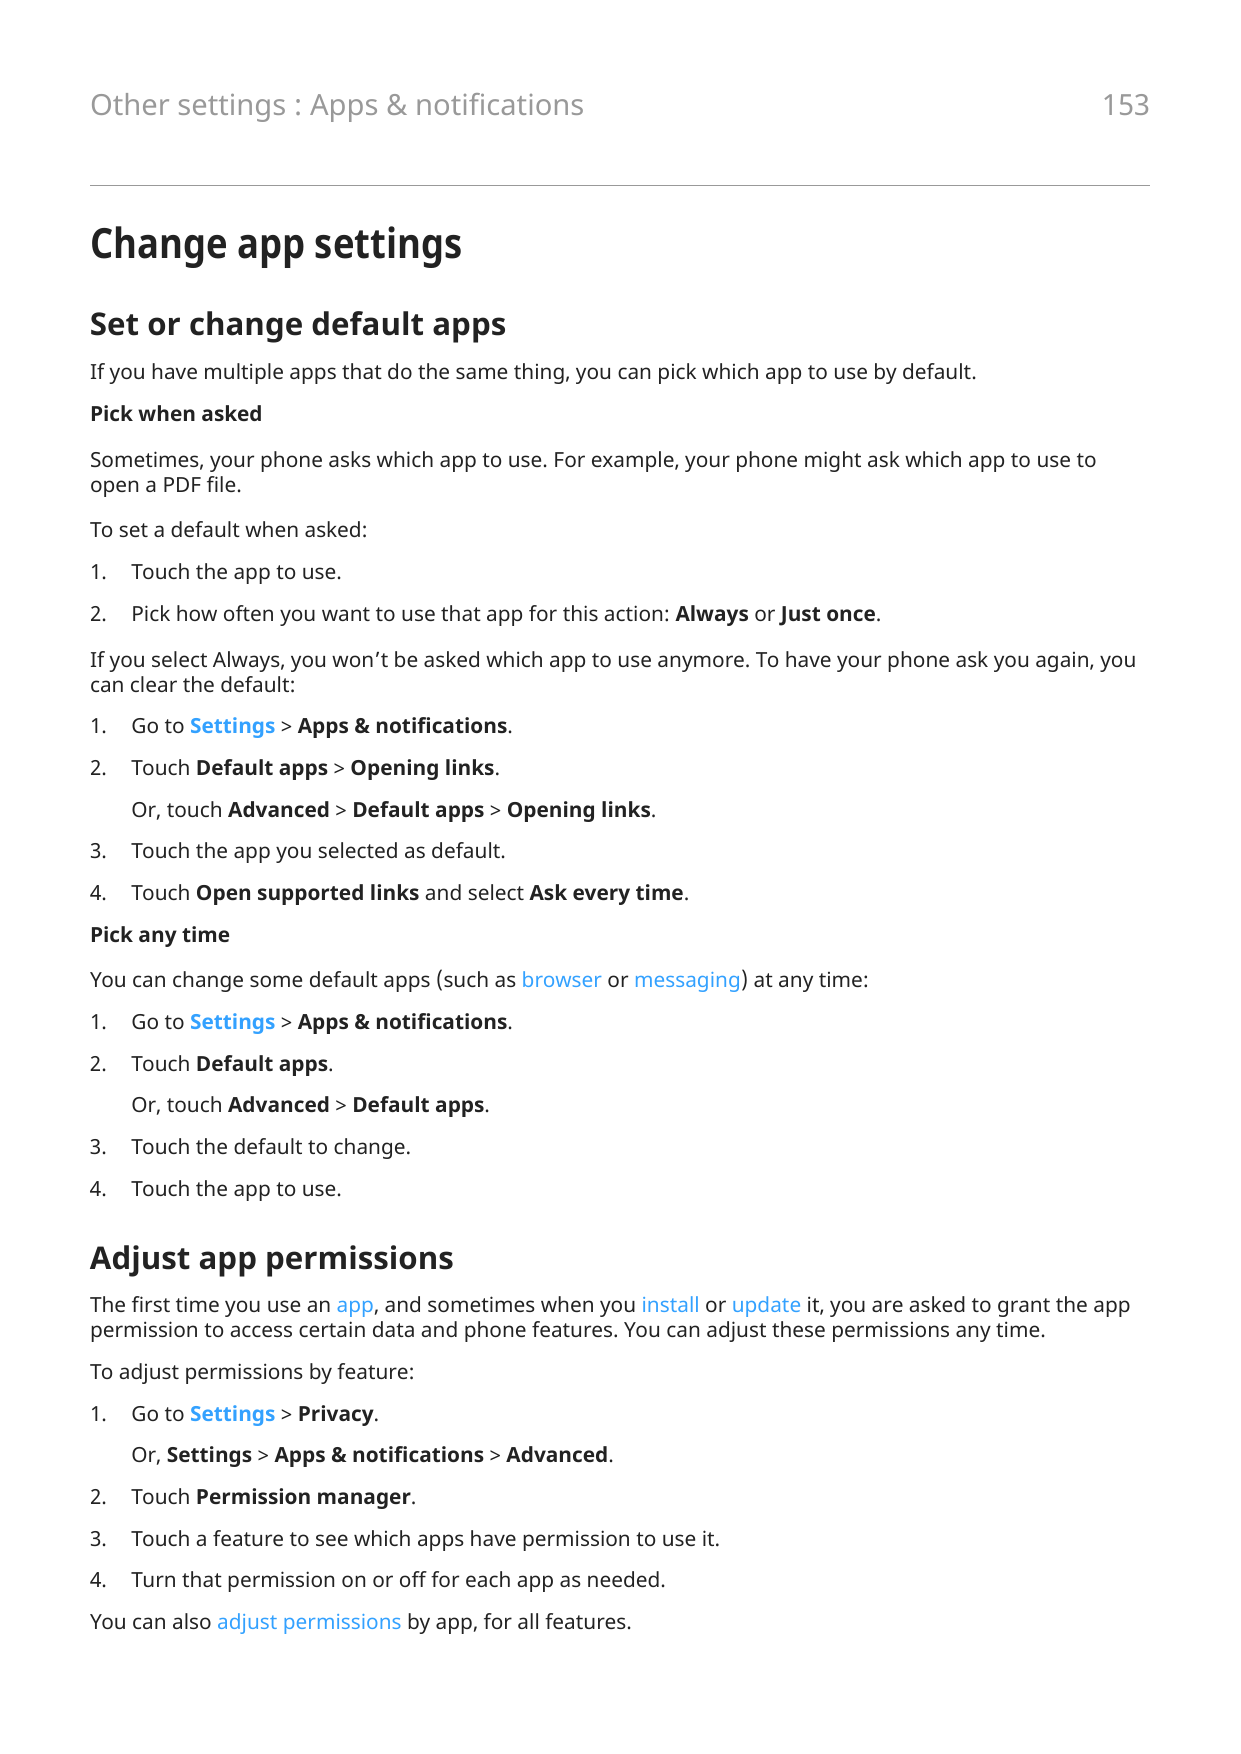 Other settings : Apps & notifications153Change app settingsSet or change default appsIf you have multiple apps that do the same 